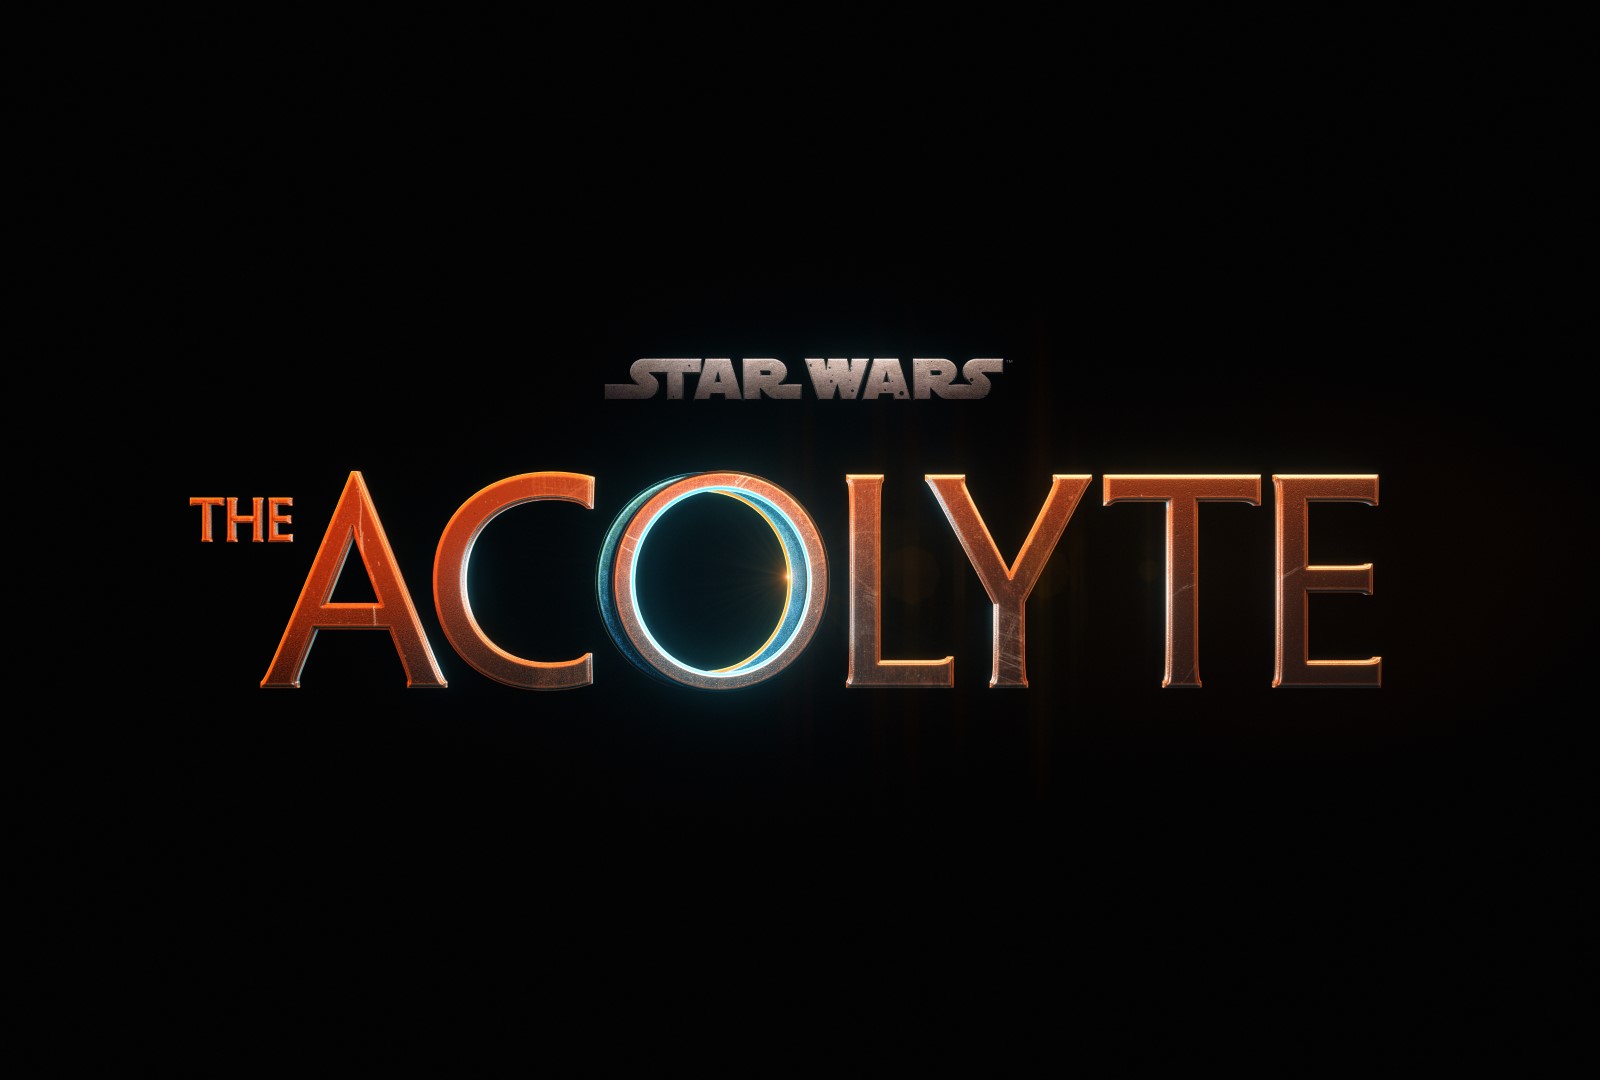 STAR WARS: THE ACOLYTE Official Trailer Showcases First Look Into the Rise of Darkness